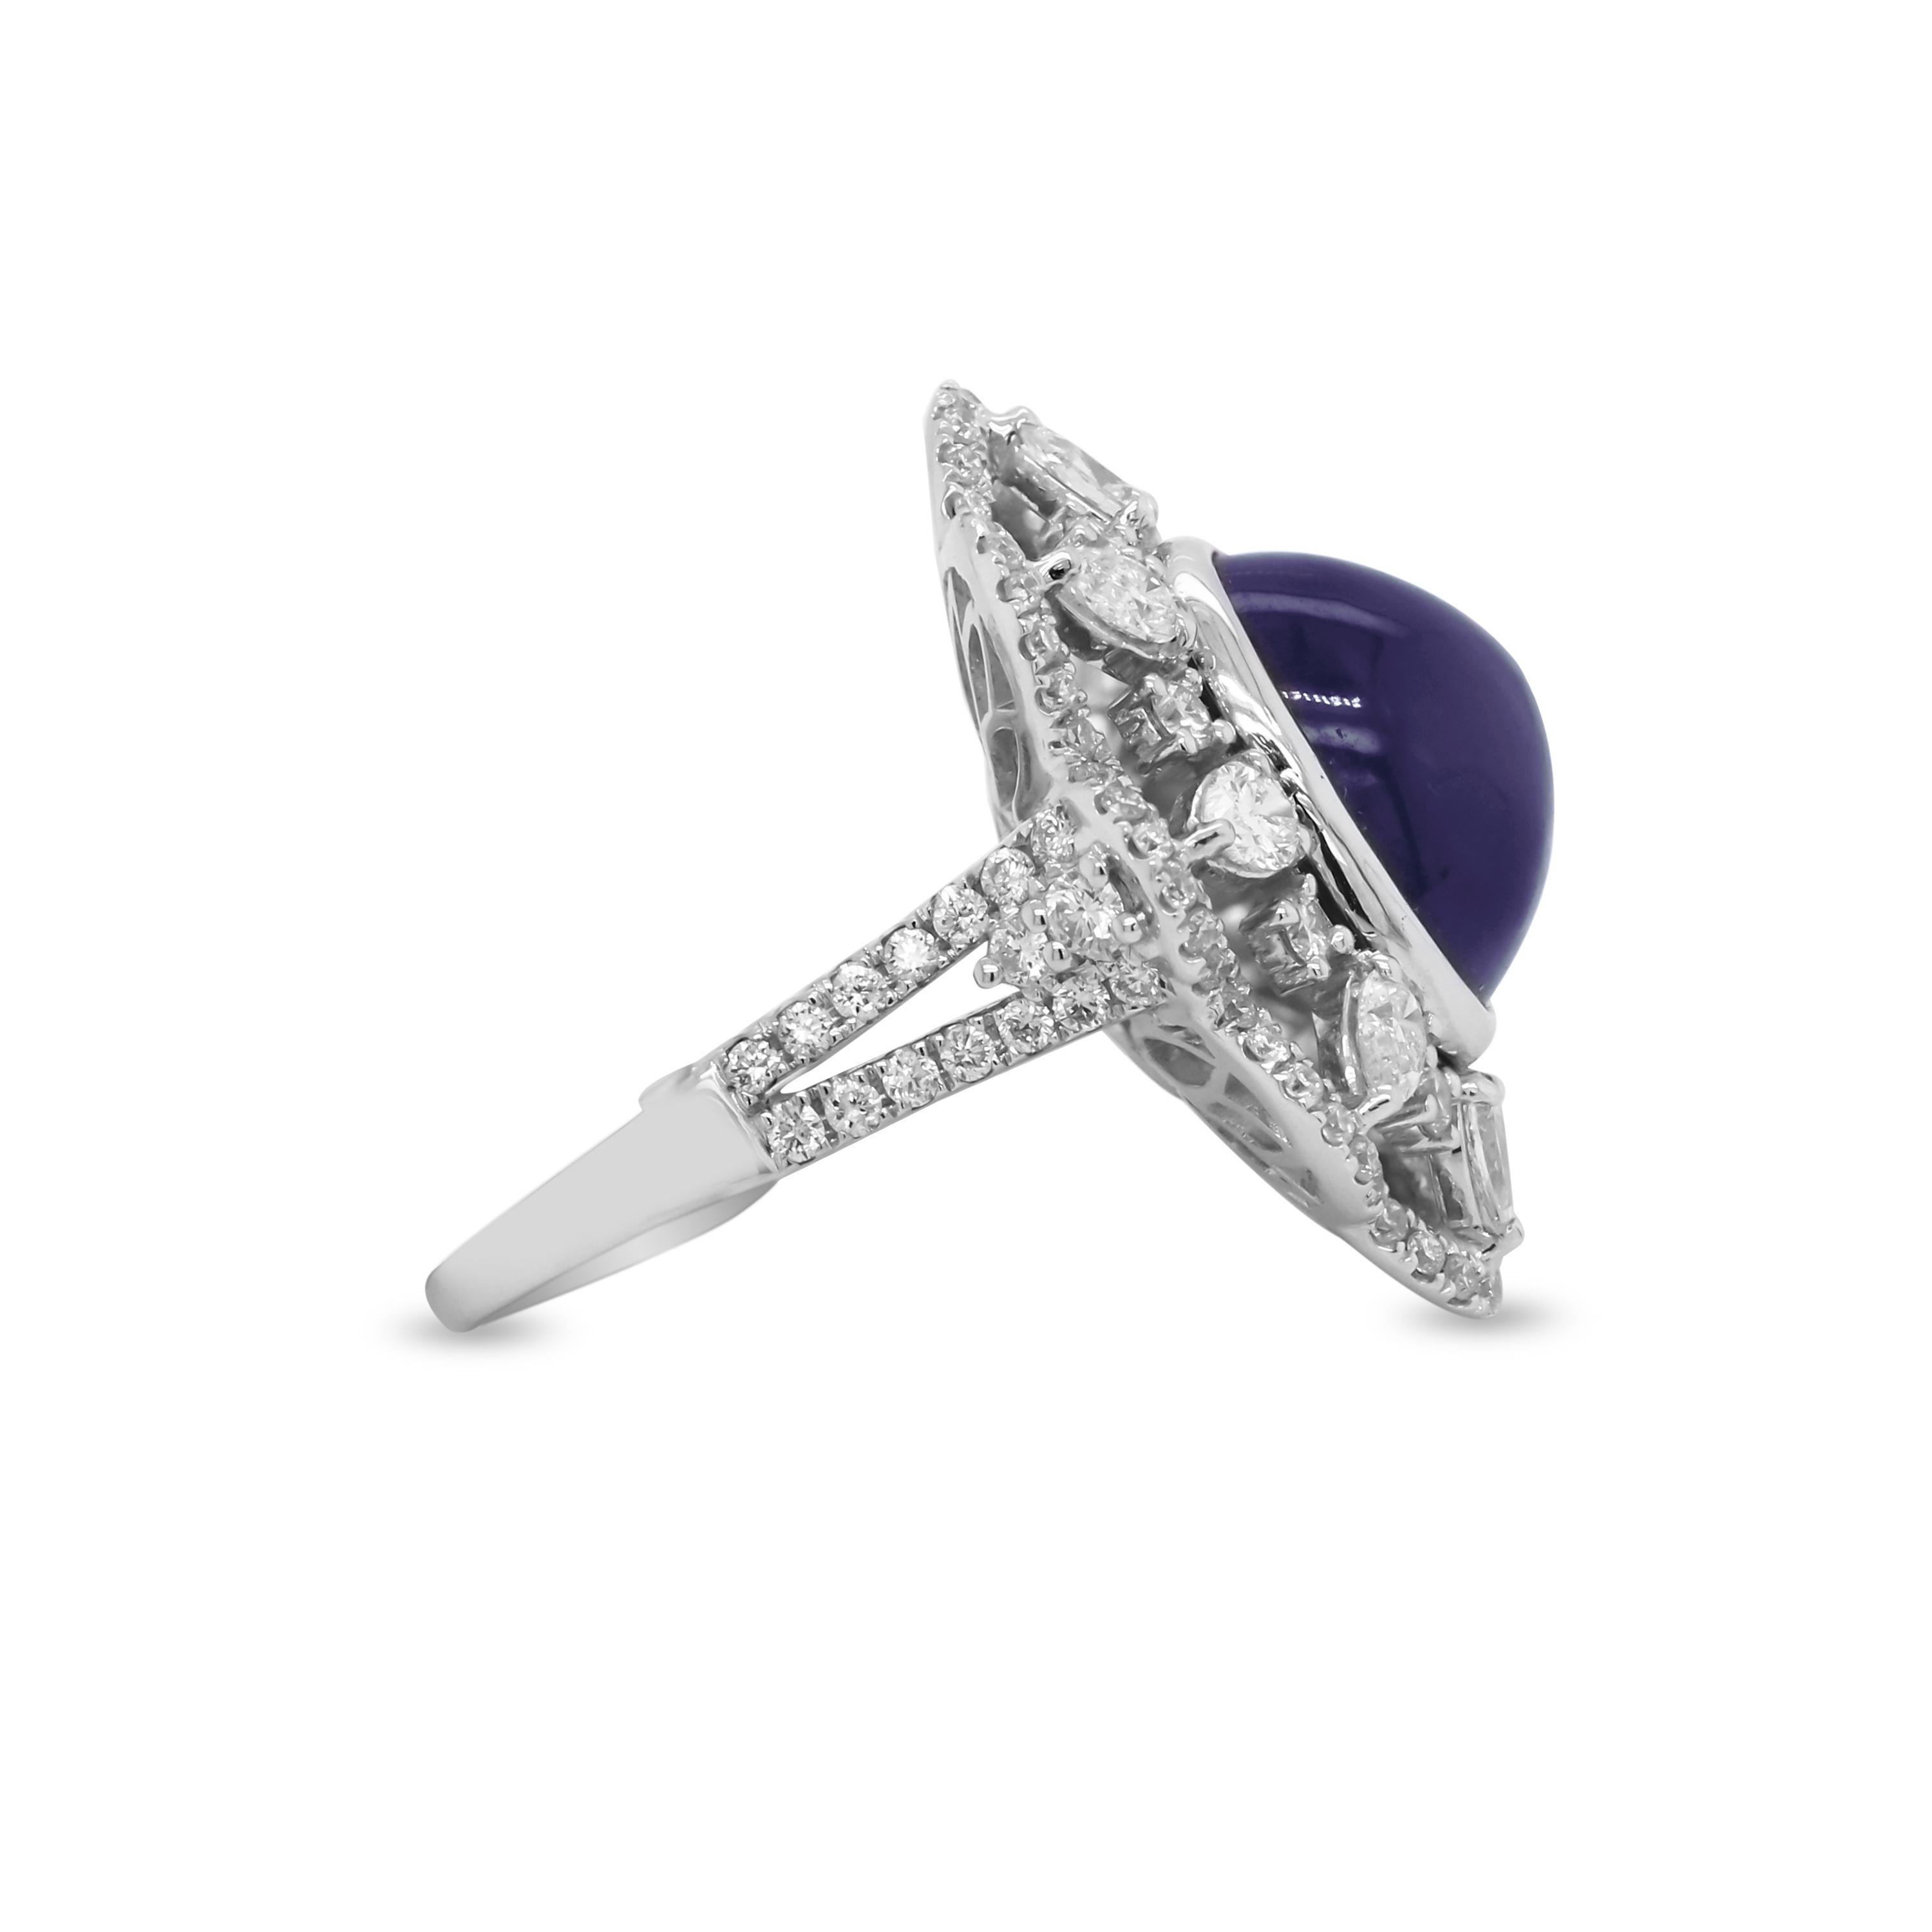 Contemporary White Gold Pear Shape and Round Diamond Ring with Cabochon Blue Sapphire Center For Sale